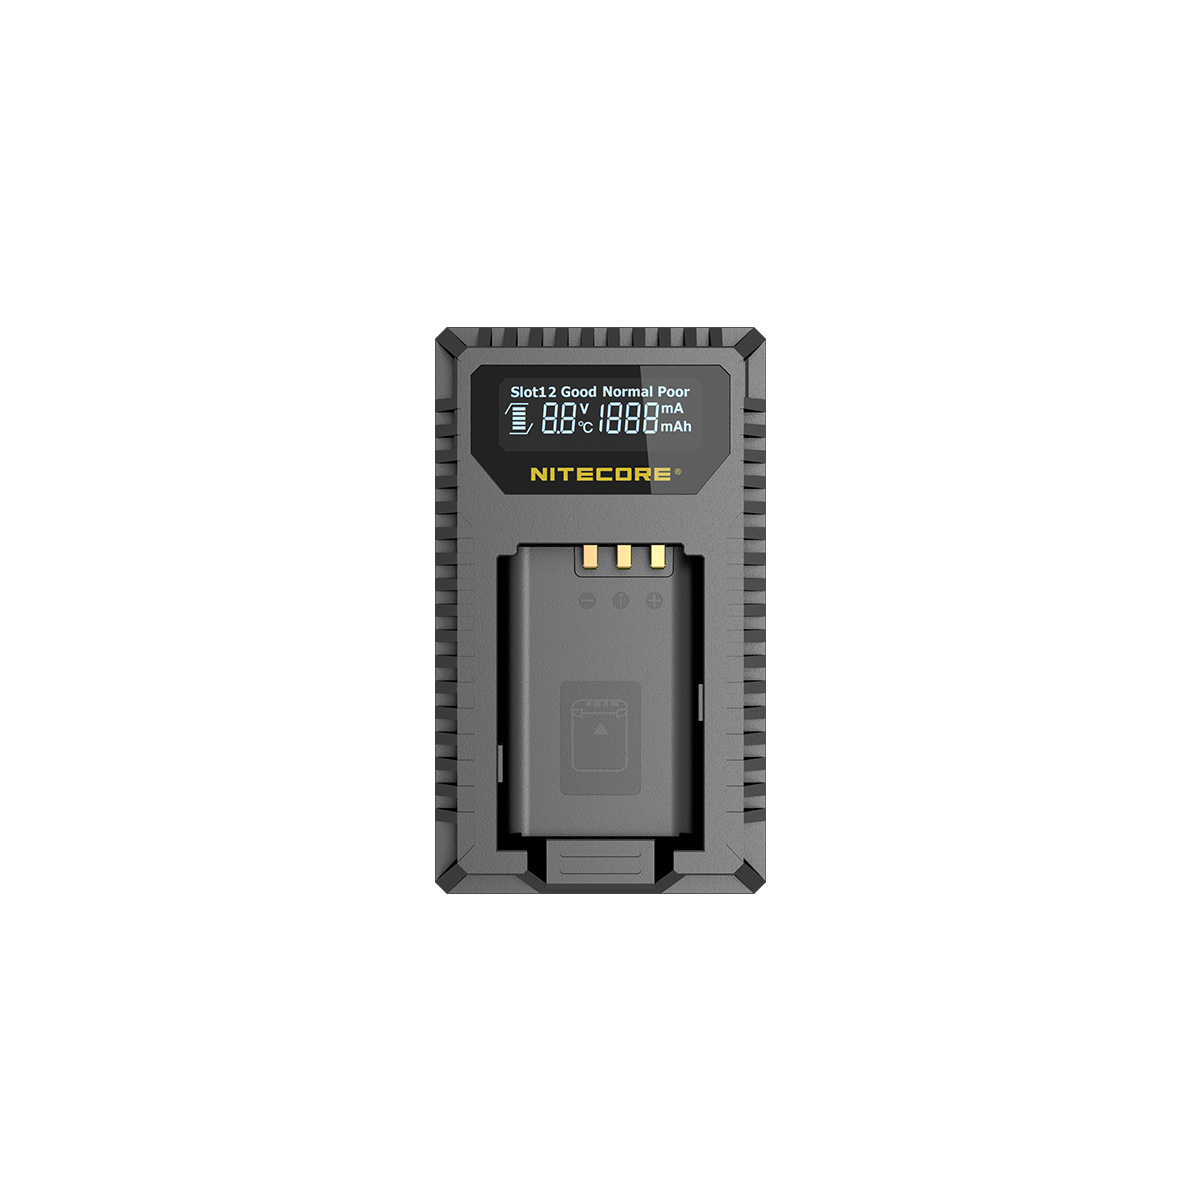 Nitecore USN2 USB Charger for NP-BX1 Batteries